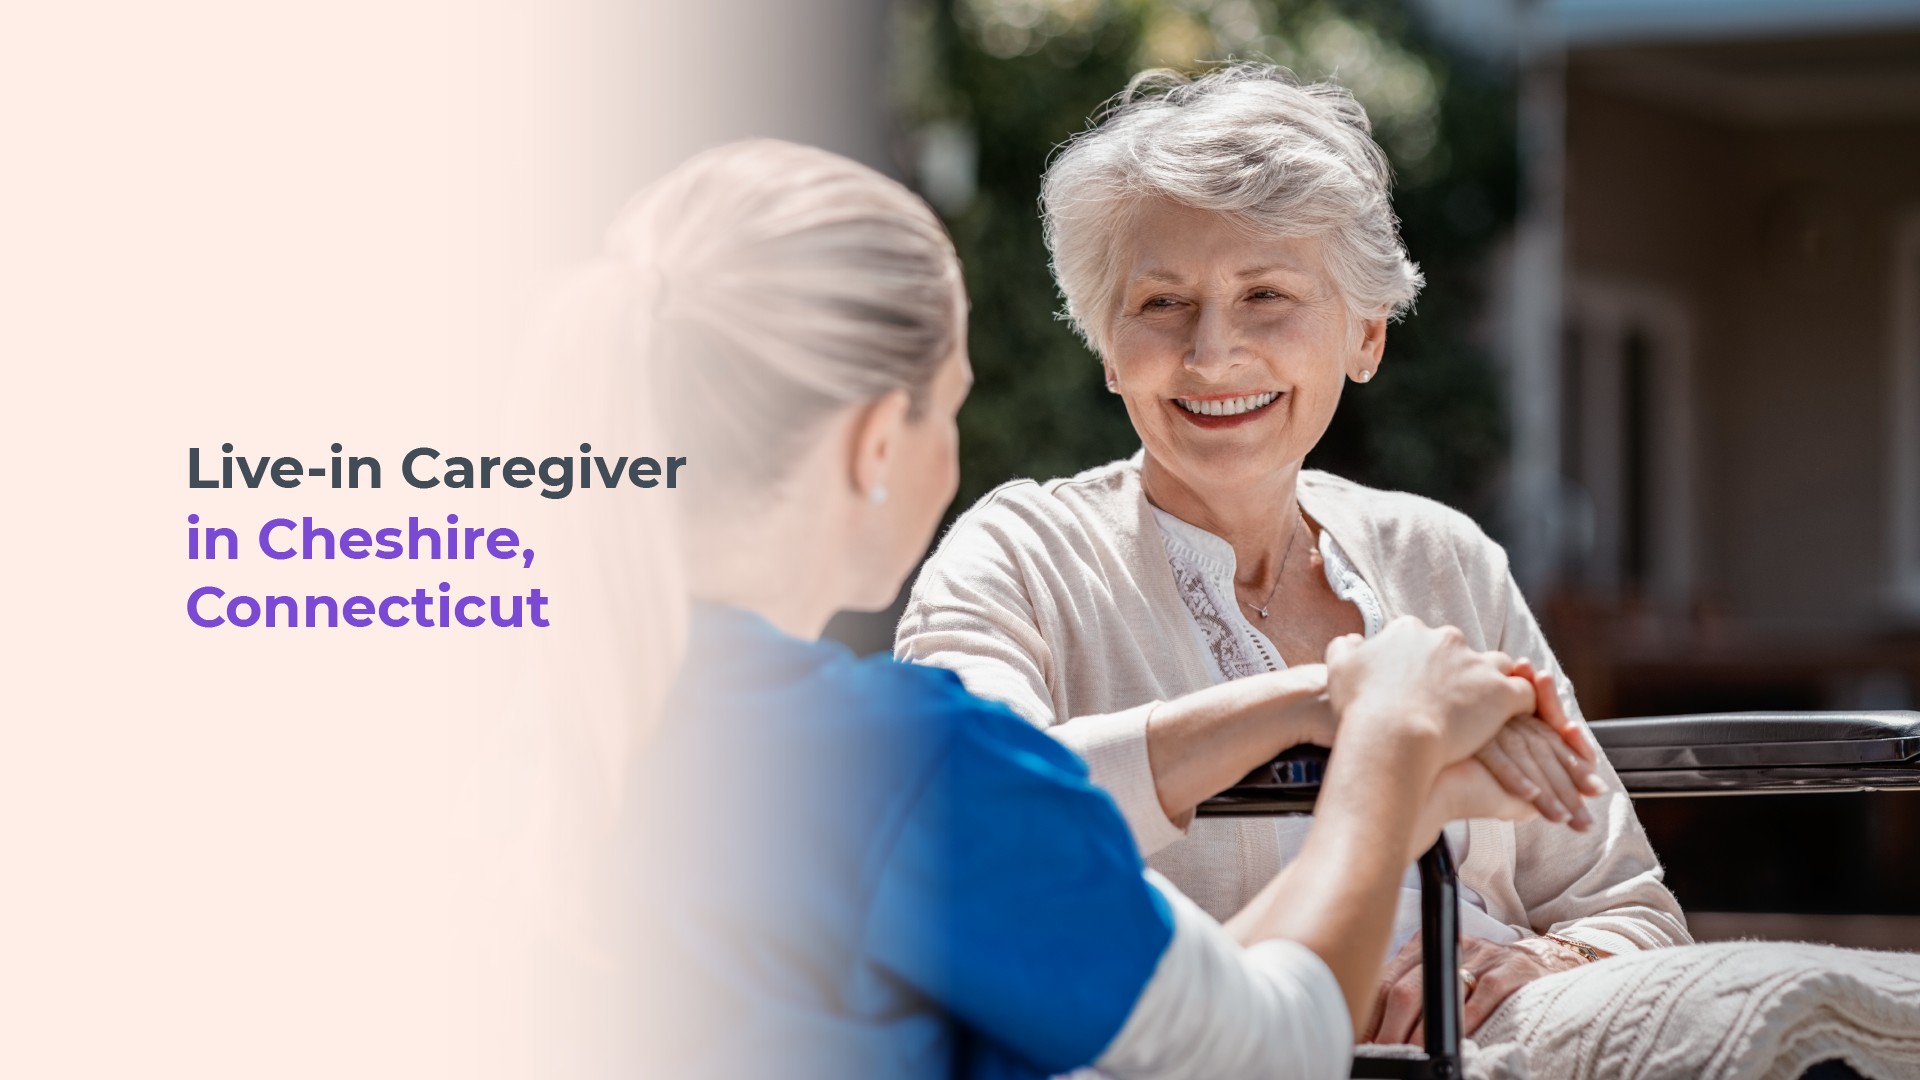 Live-in Caregivers in Cheshire